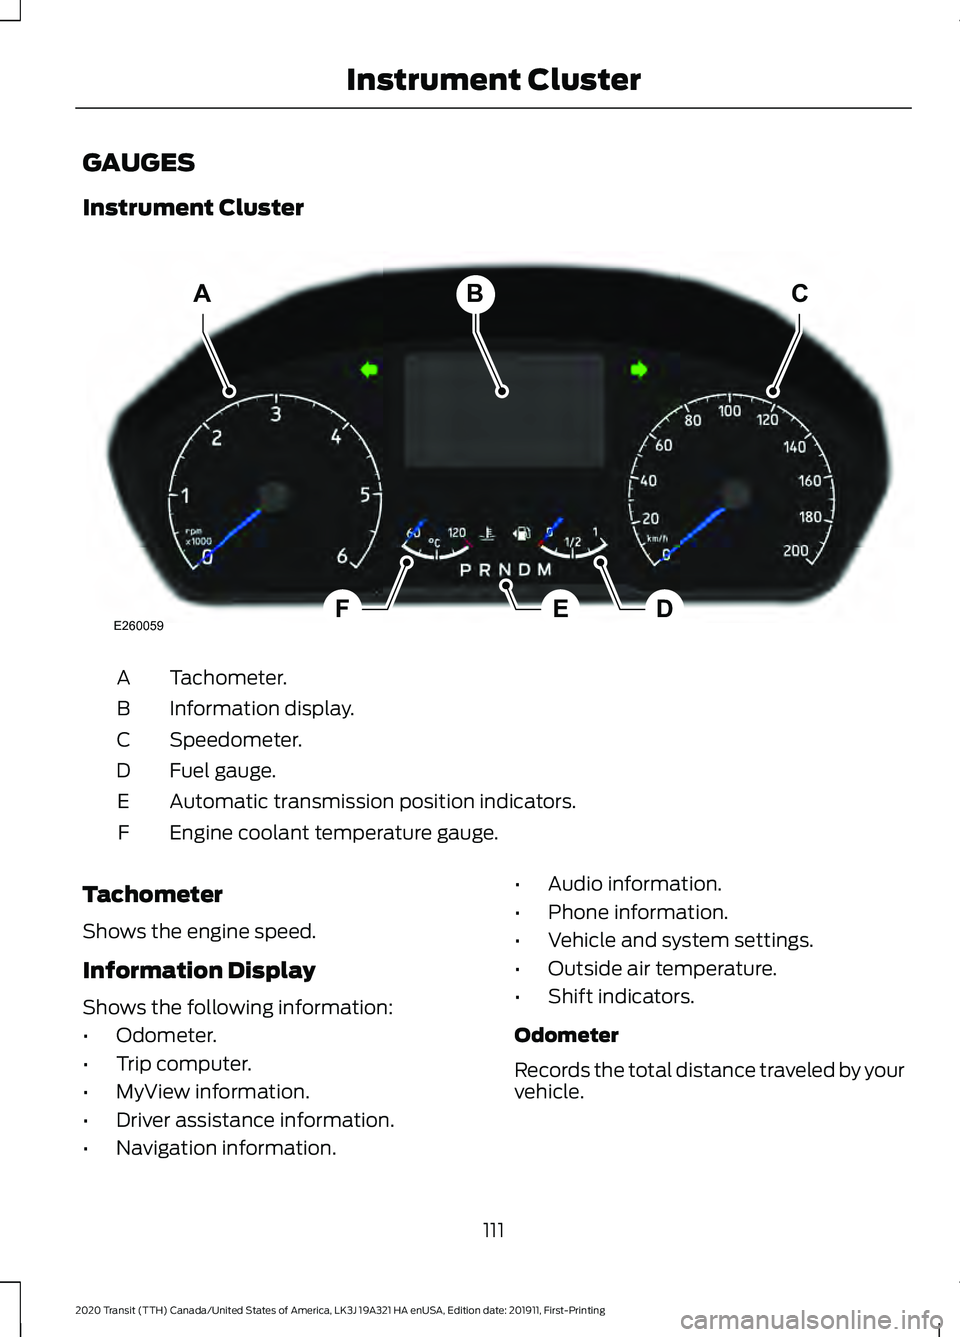 FORD TRANSIT 2020  Owners Manual GAUGES
Instrument Cluster
Tachometer.
A
Information display.
B
Speedometer.
C
Fuel gauge.
D
Automatic transmission position indicators.
E
Engine coolant temperature gauge.
F
Tachometer
Shows the engin